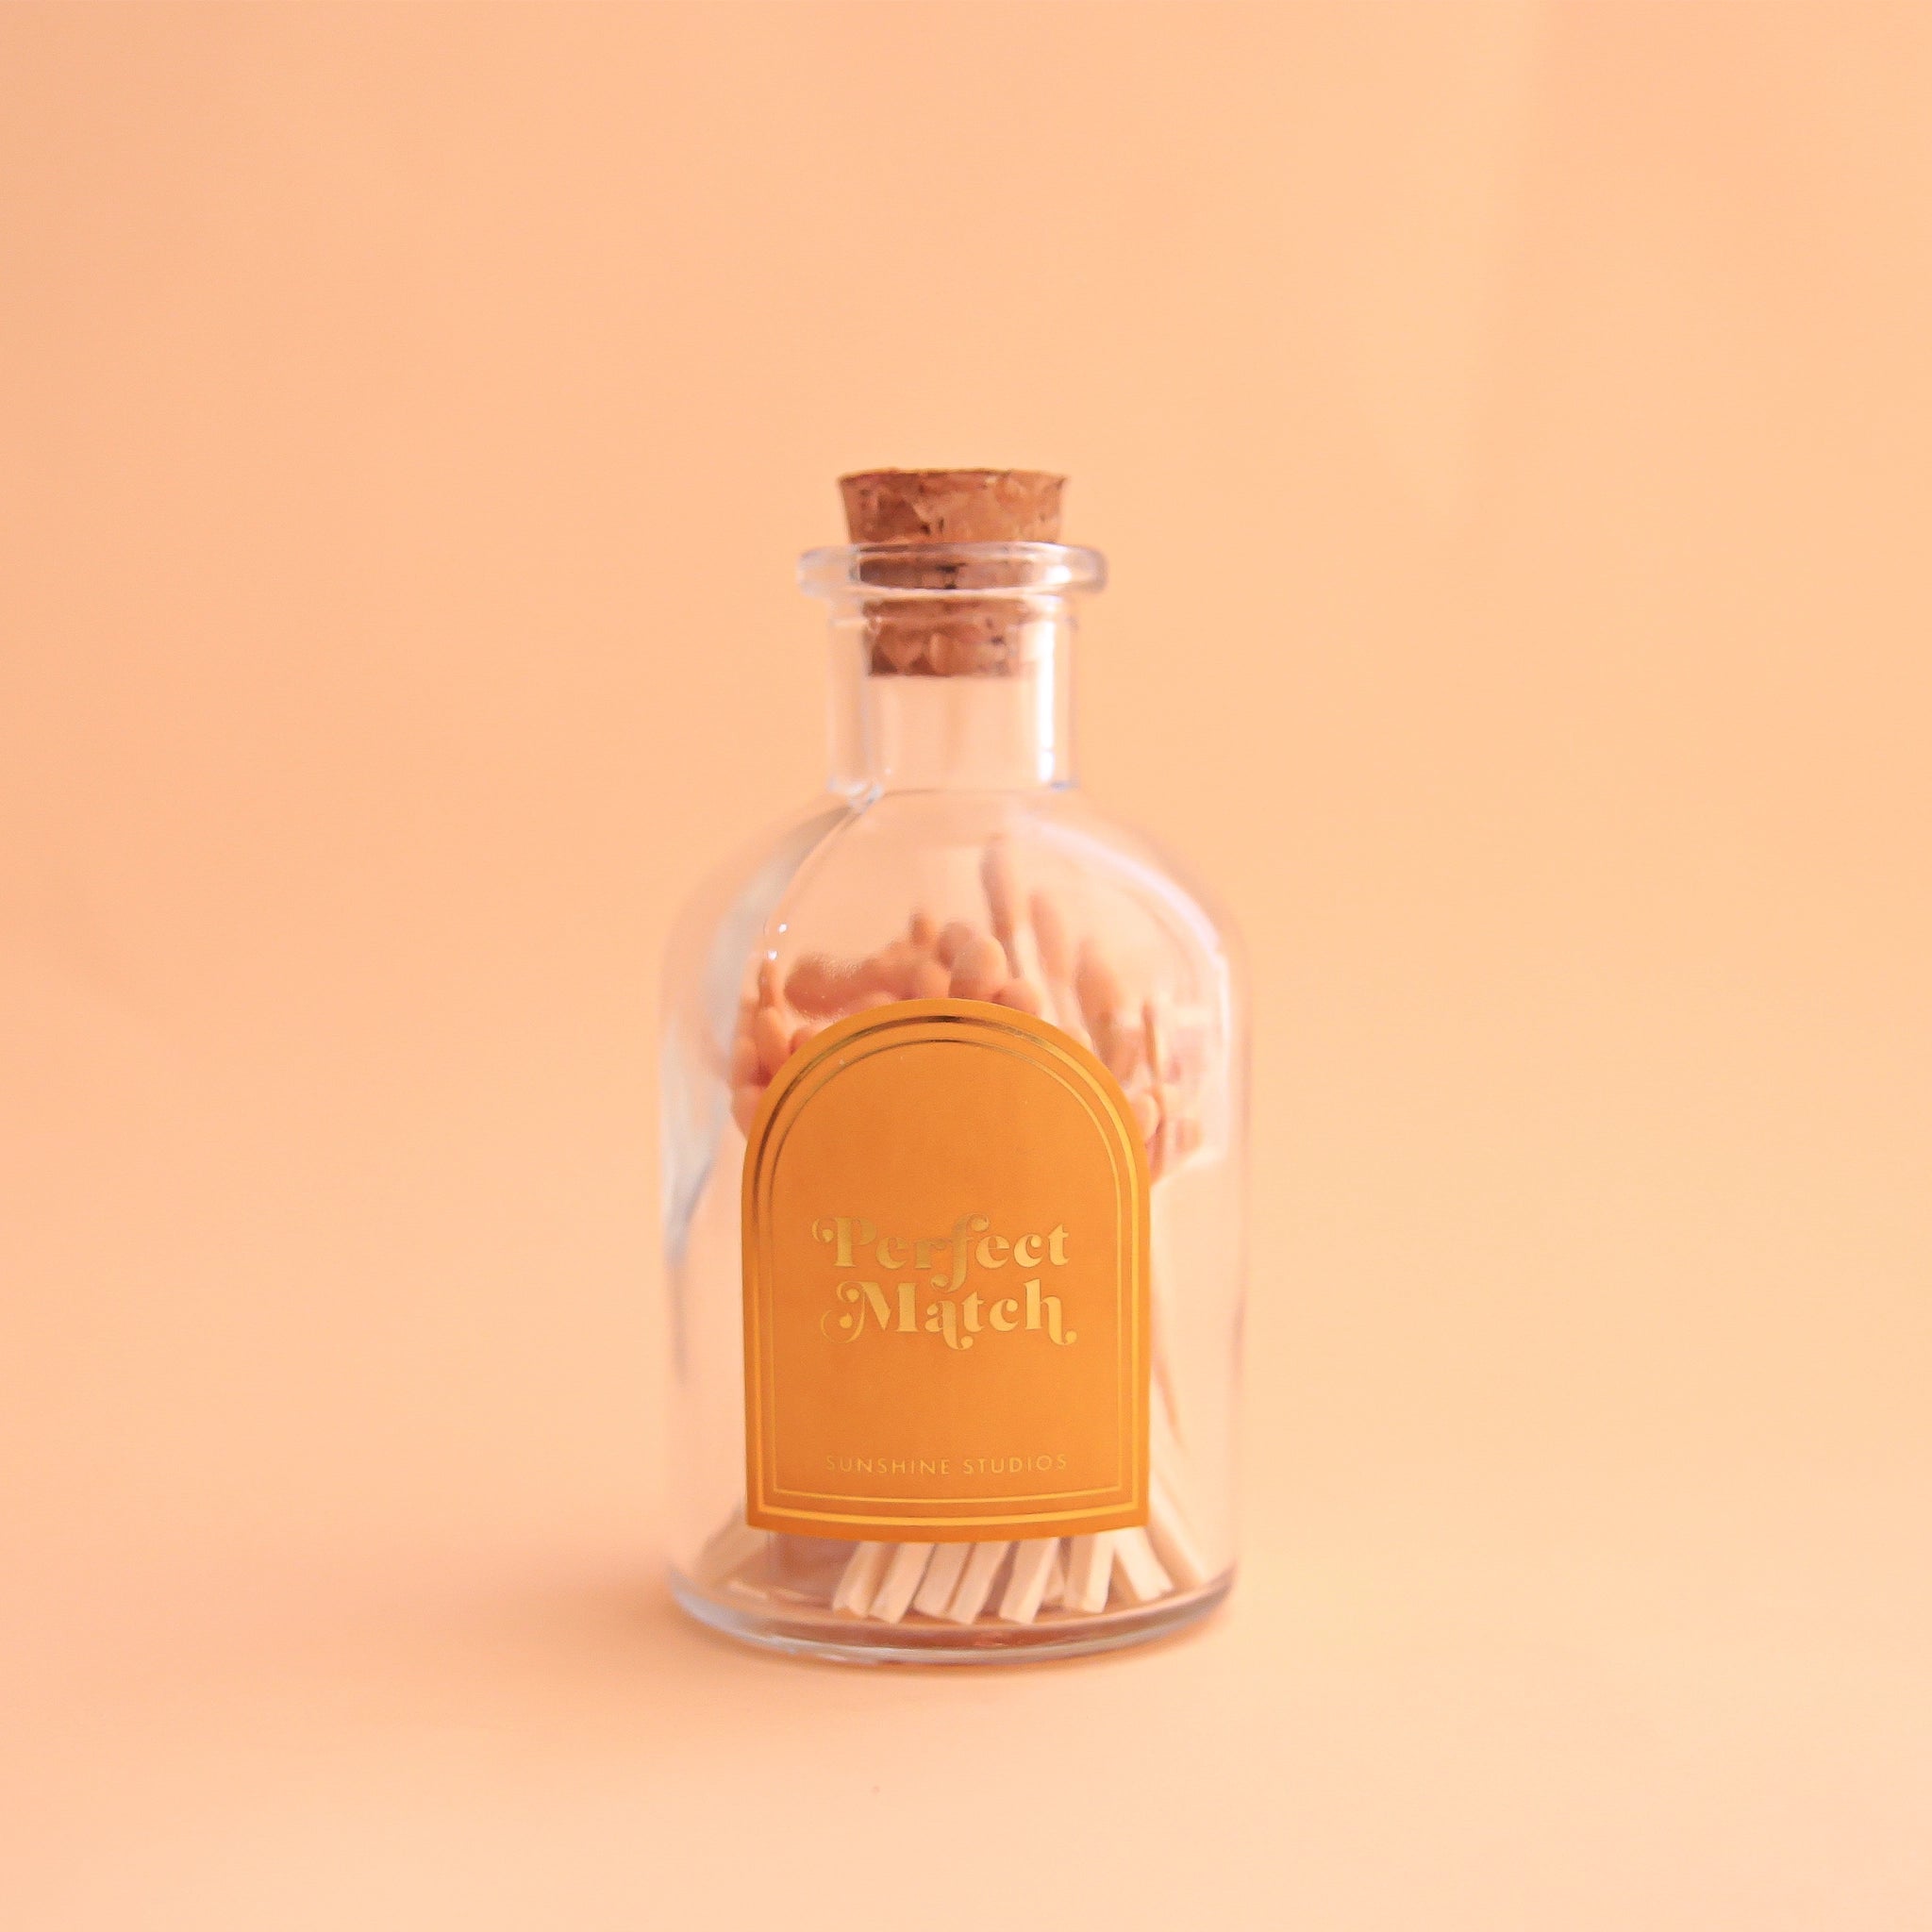 On a peachy background is a clear jar of wooden matches with a gold arched label on the front that reads, "Perfect Match". 